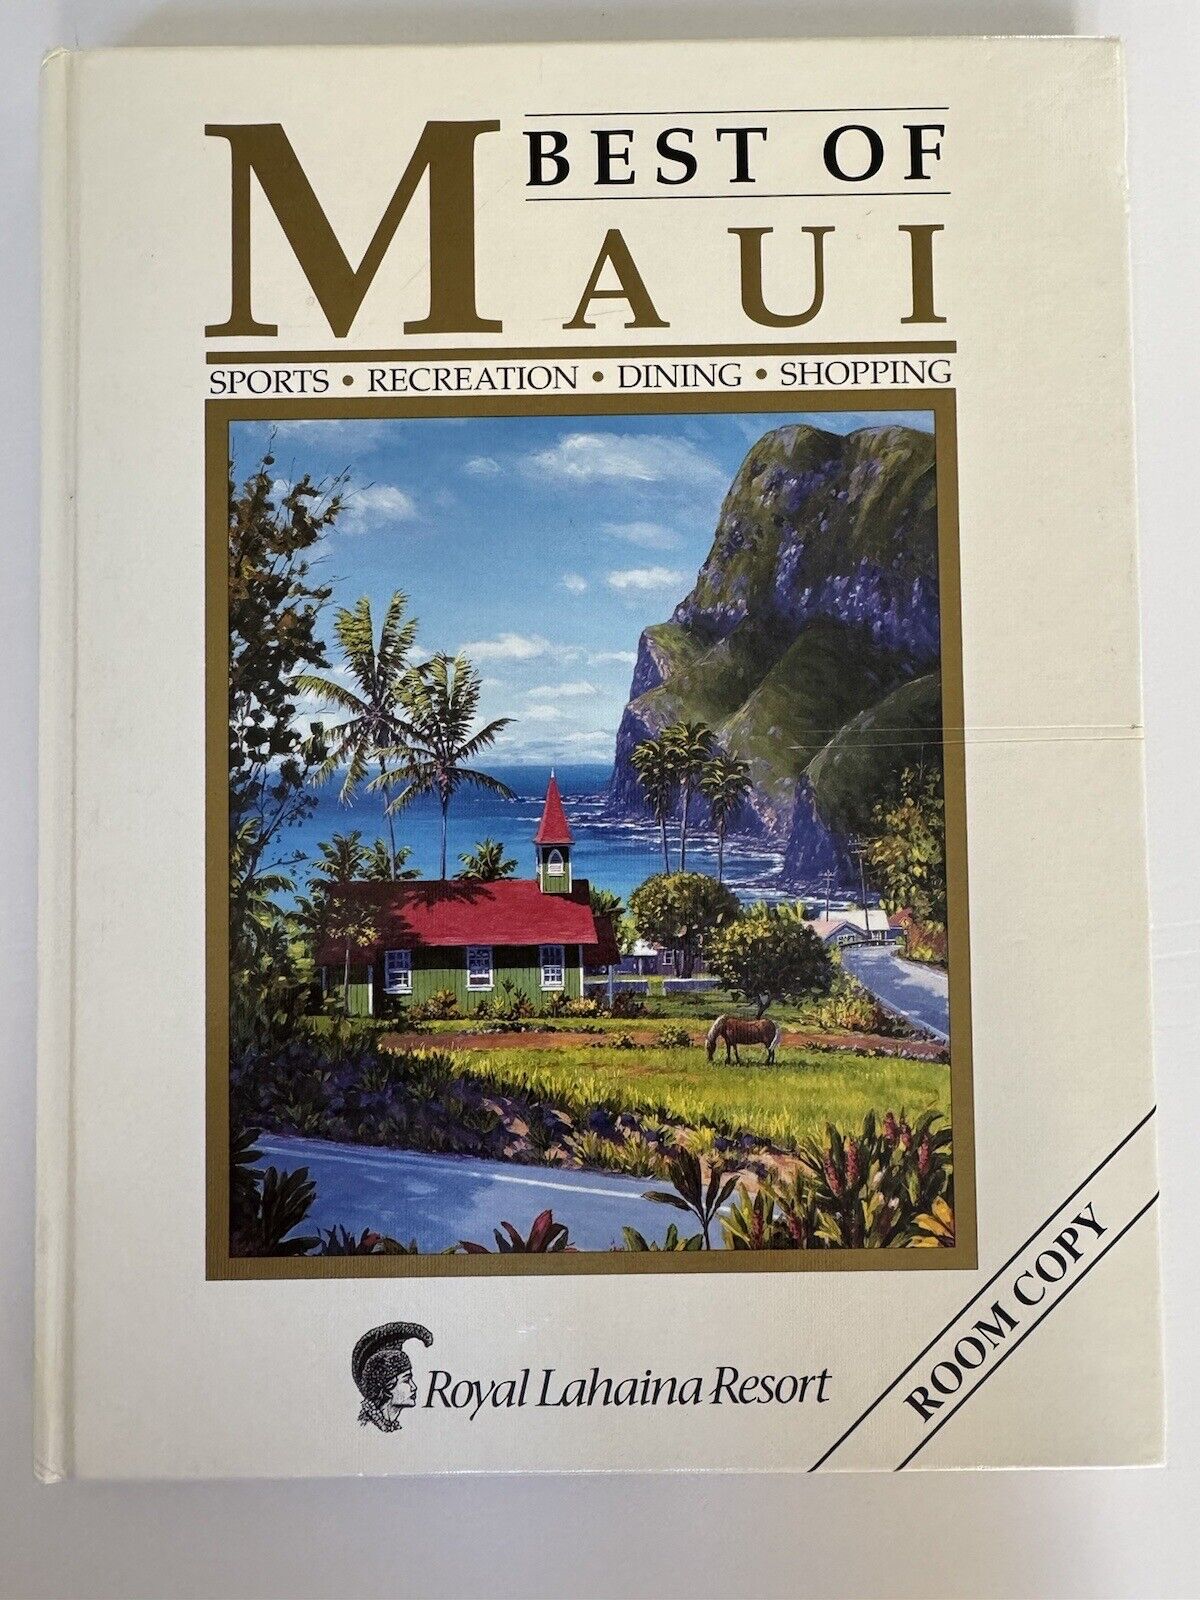 BEST OF MAUI 2002/2003 from Royal Lahaina Resort Hotel - Hardcover - Vintage